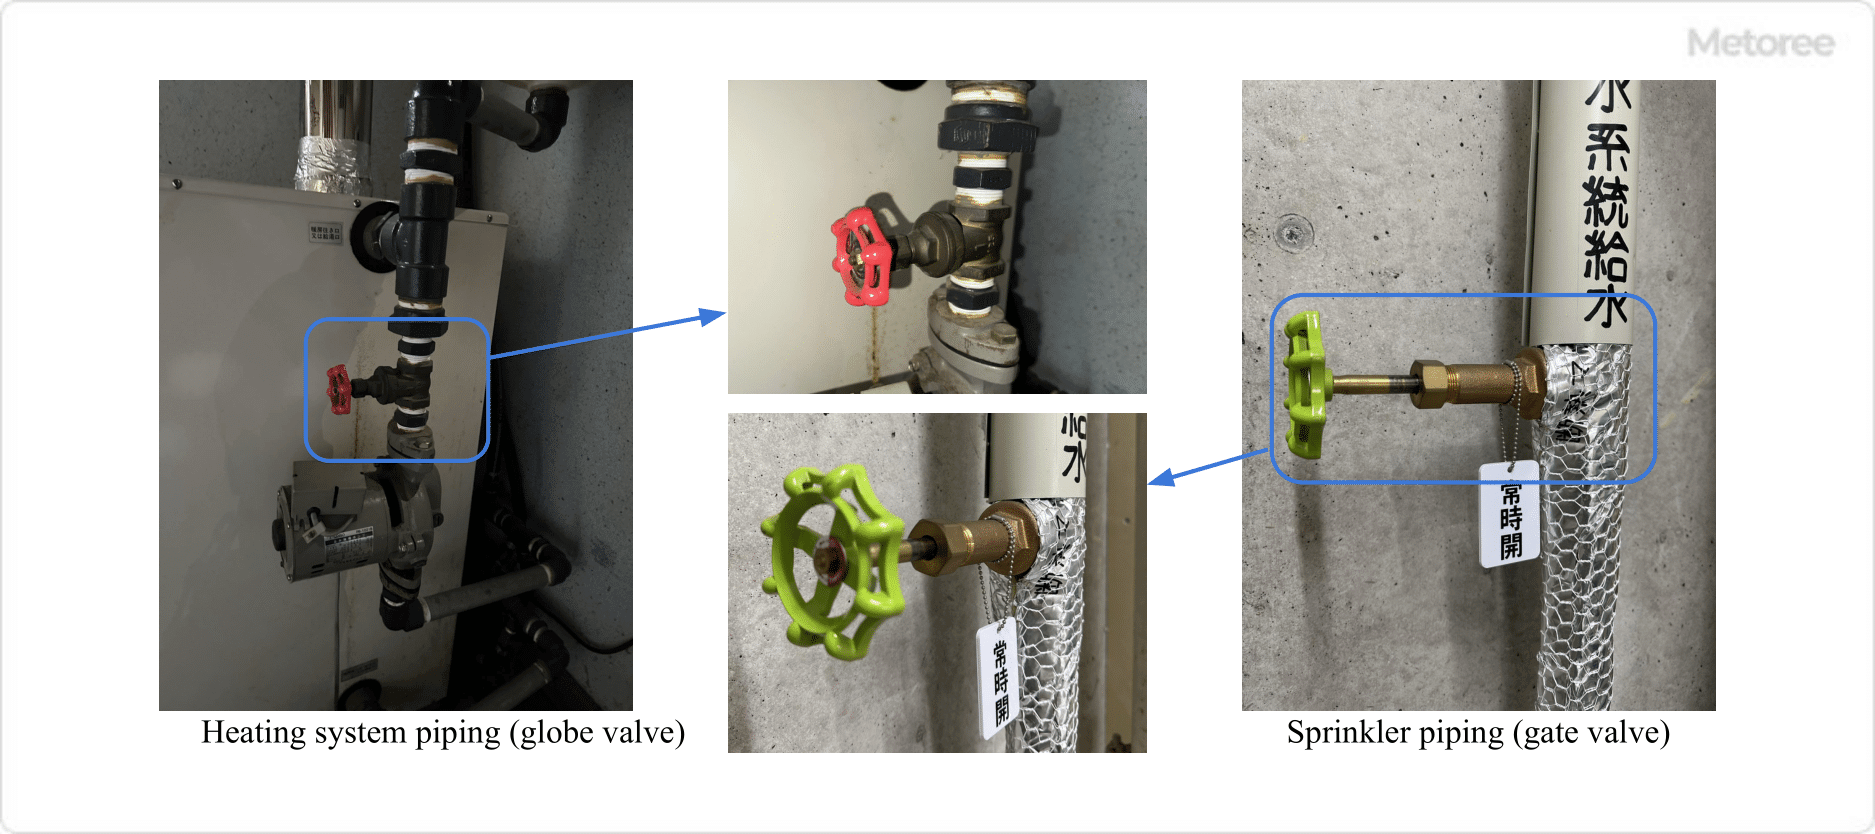 Figure 1. Example of stop valve use